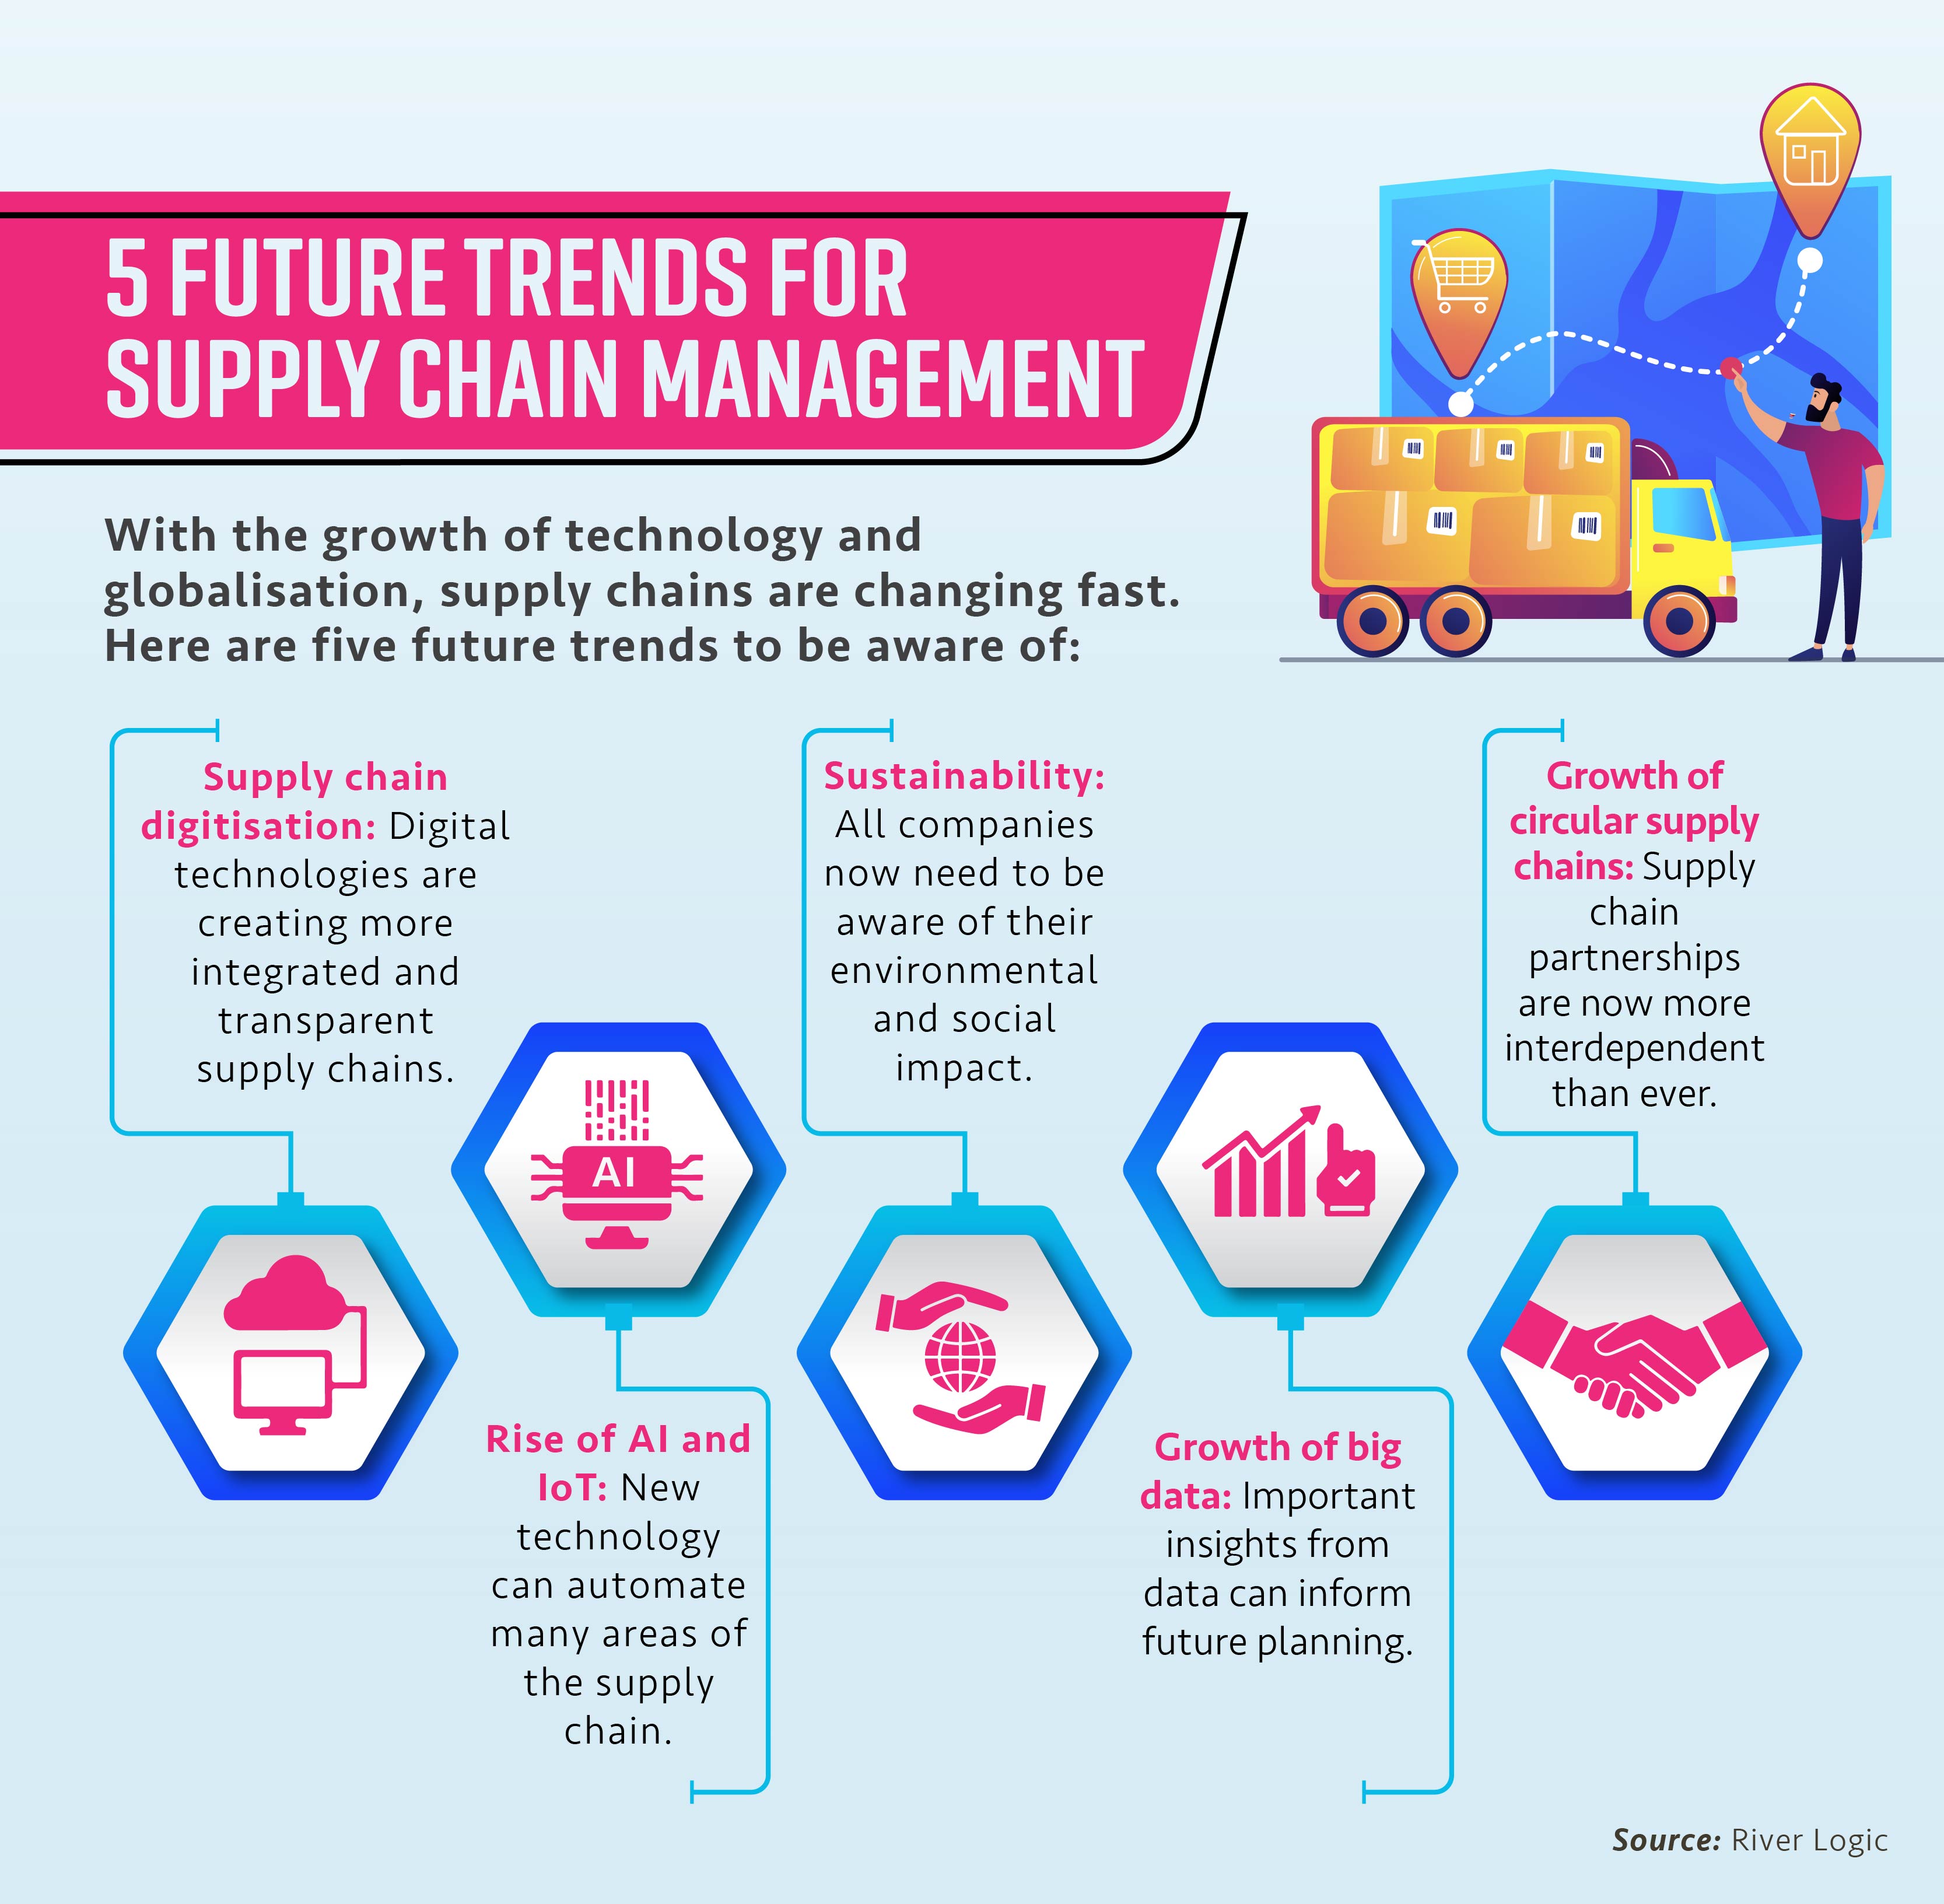 A horizontal list of five future trends in supply chain management.